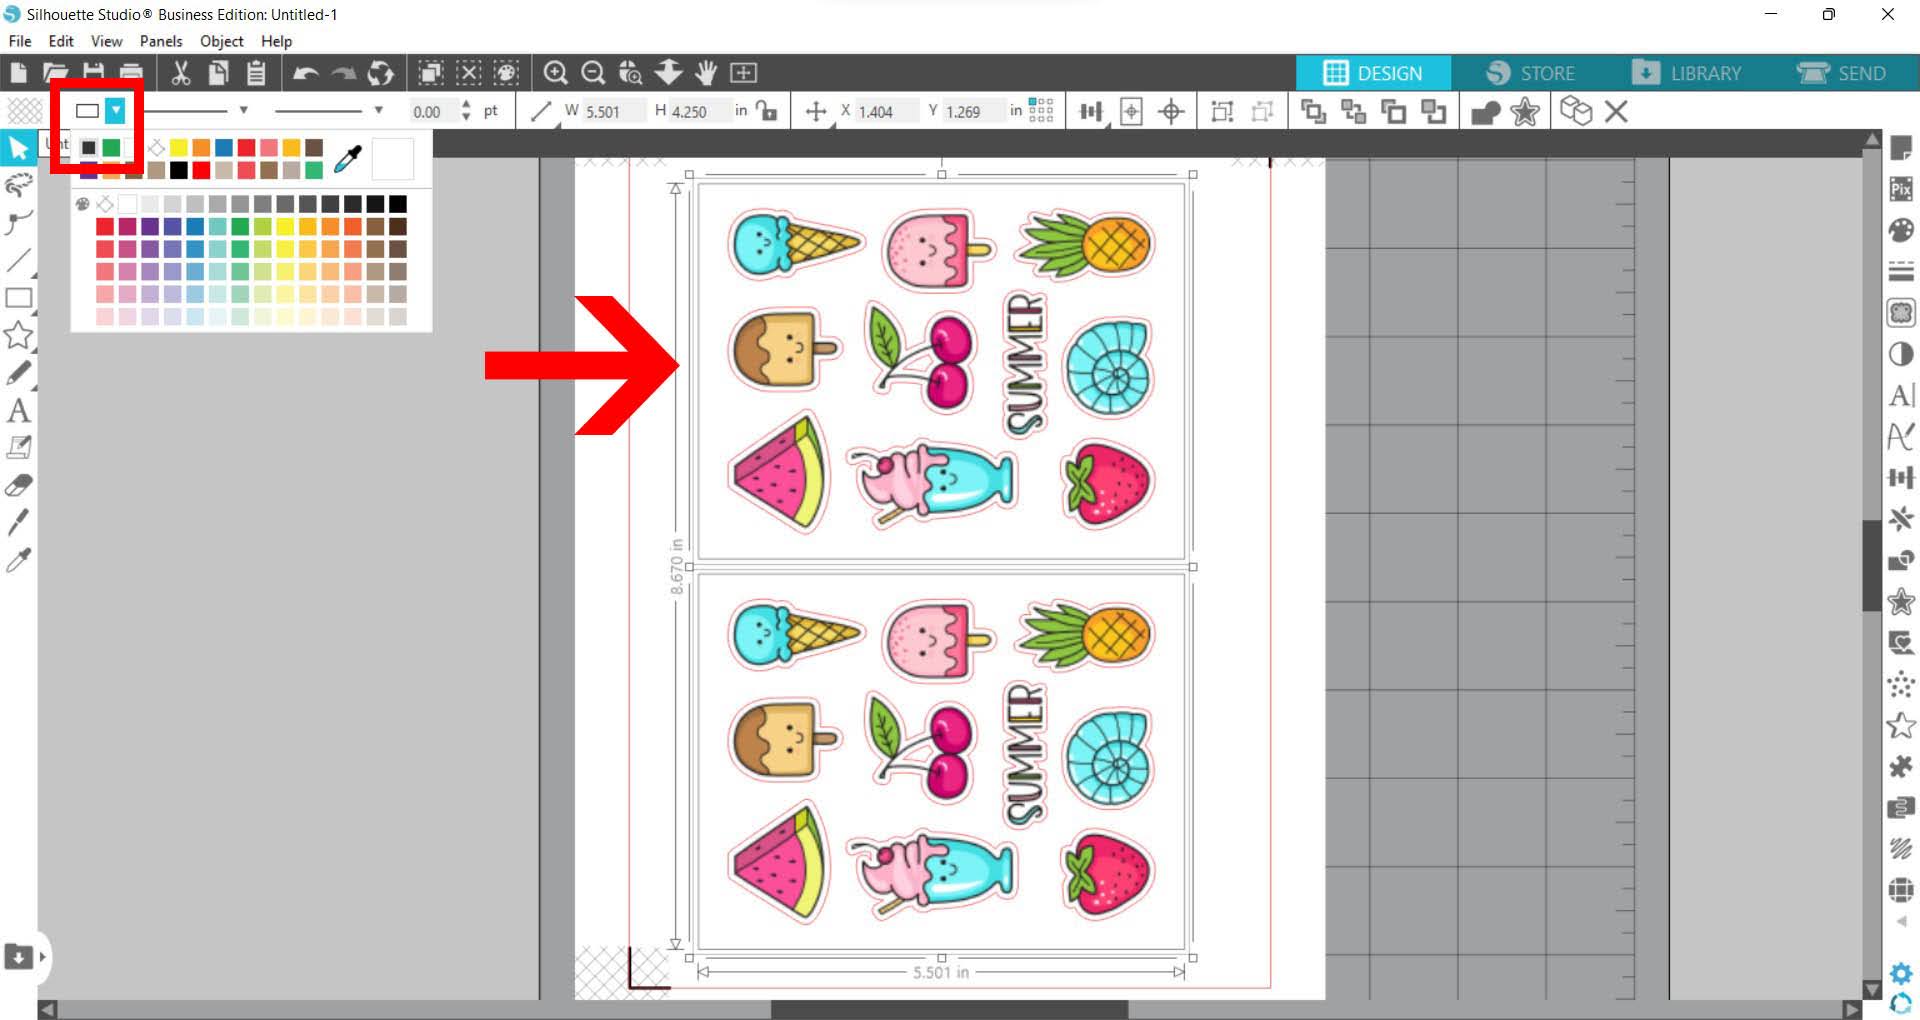 How to Make Print and Cut Sticker Sets (Silhouette Studio V4 Tutorial) -  Silhouette School